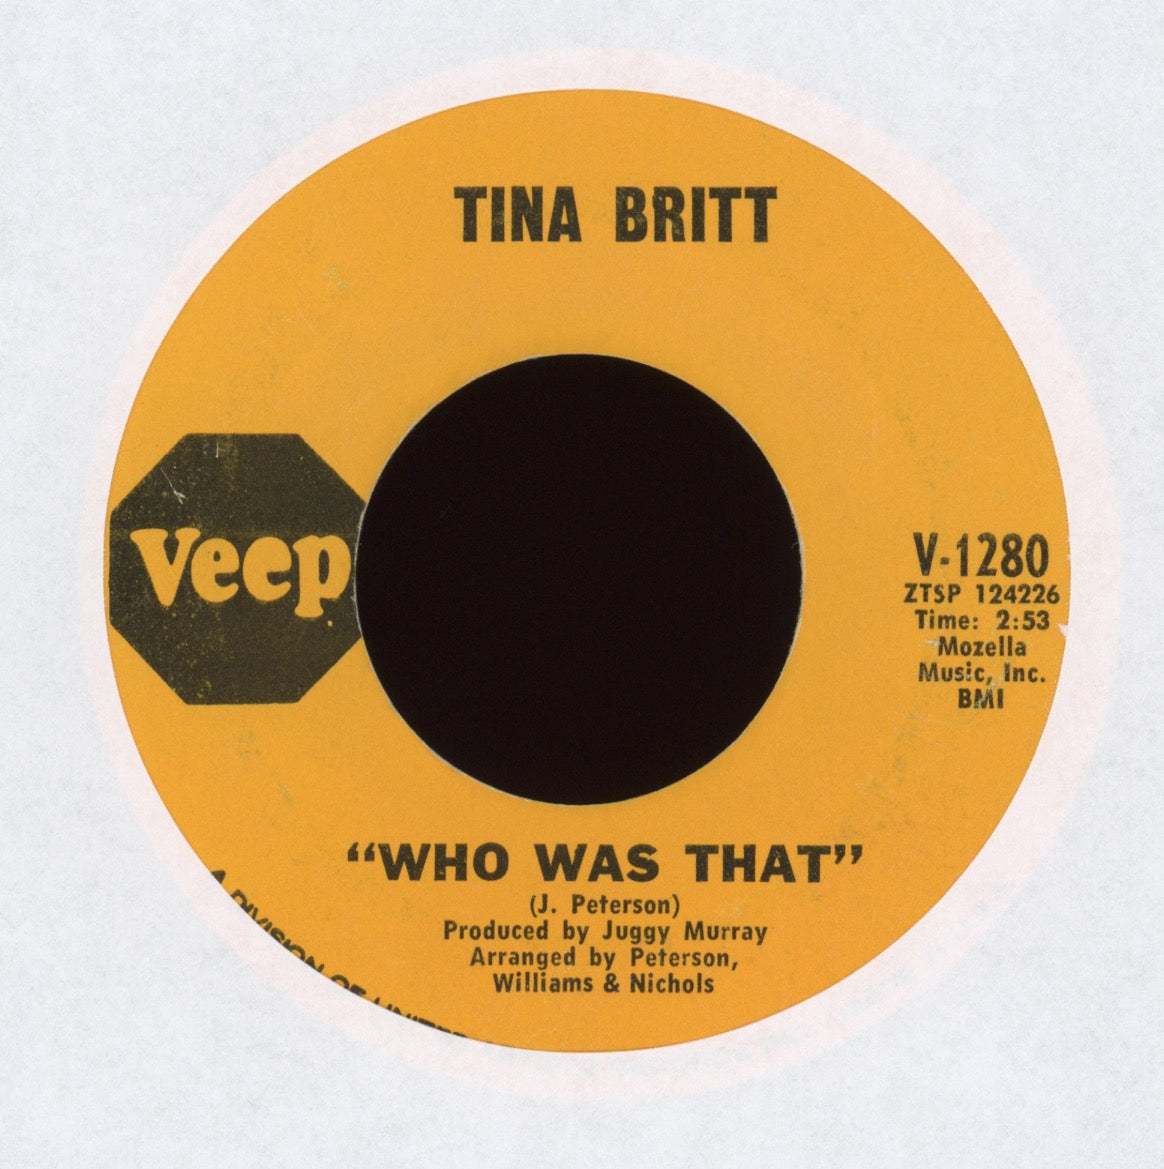 Tina Britt - Who Was That on Veep